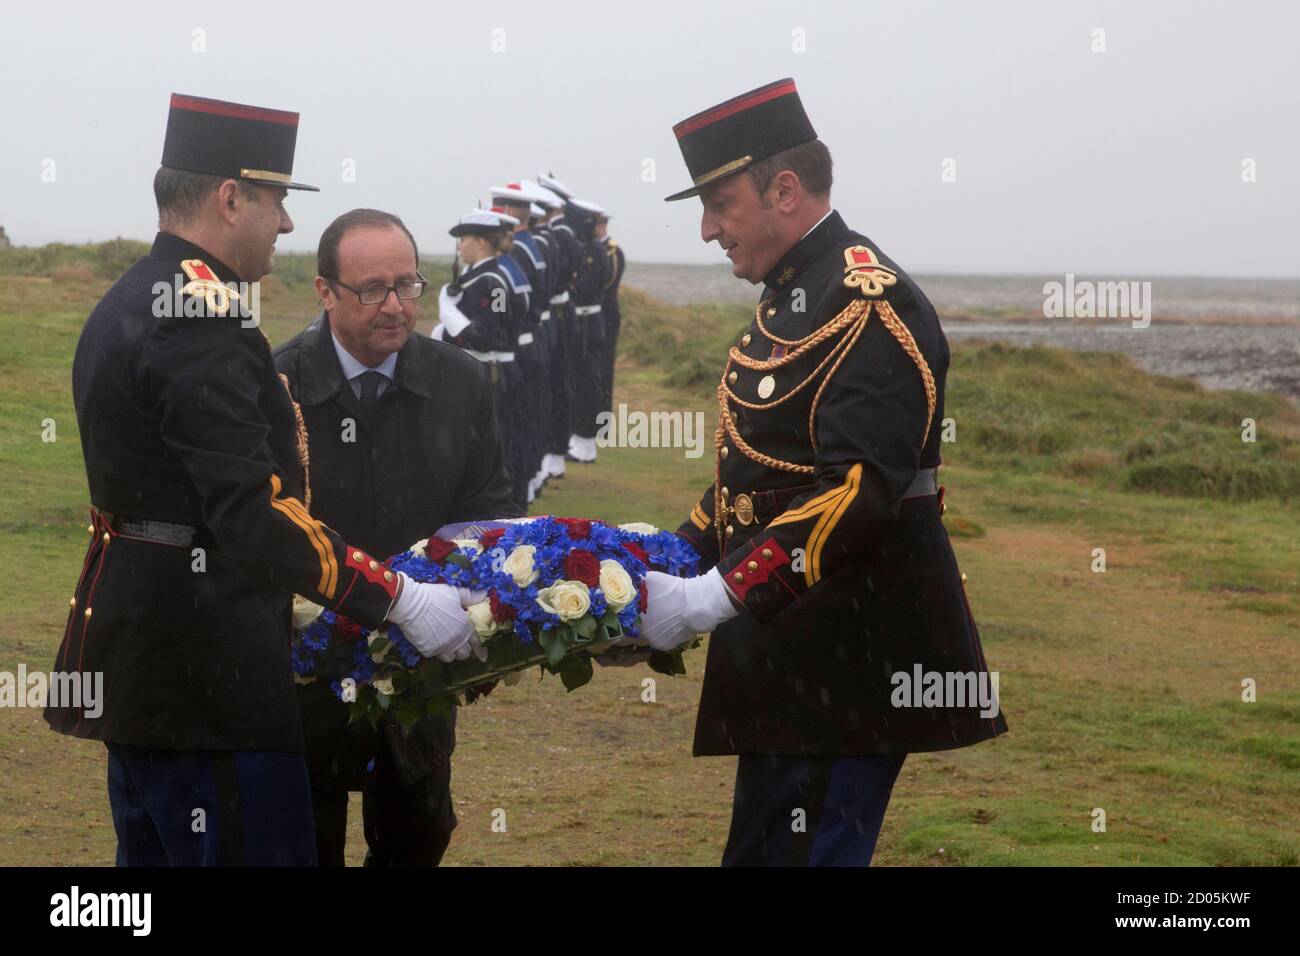 French President Francois Hollande lays a wreath during a ceremony on the Ile de Sein, an island located near the Pointe-du-Raz, off the Brittany coast, August 25, 2014. Hollande attends a ceremony to mark the departure of all the men who were living on the island and who joined Charles de Gaulle in England after the broadcast of his appeal on June 18, 1940.    REUTERS/Philippe Wojazer  (FRANCE - Tags: POLITICS ANNIVERSARY CONFLICT) Stock Photo